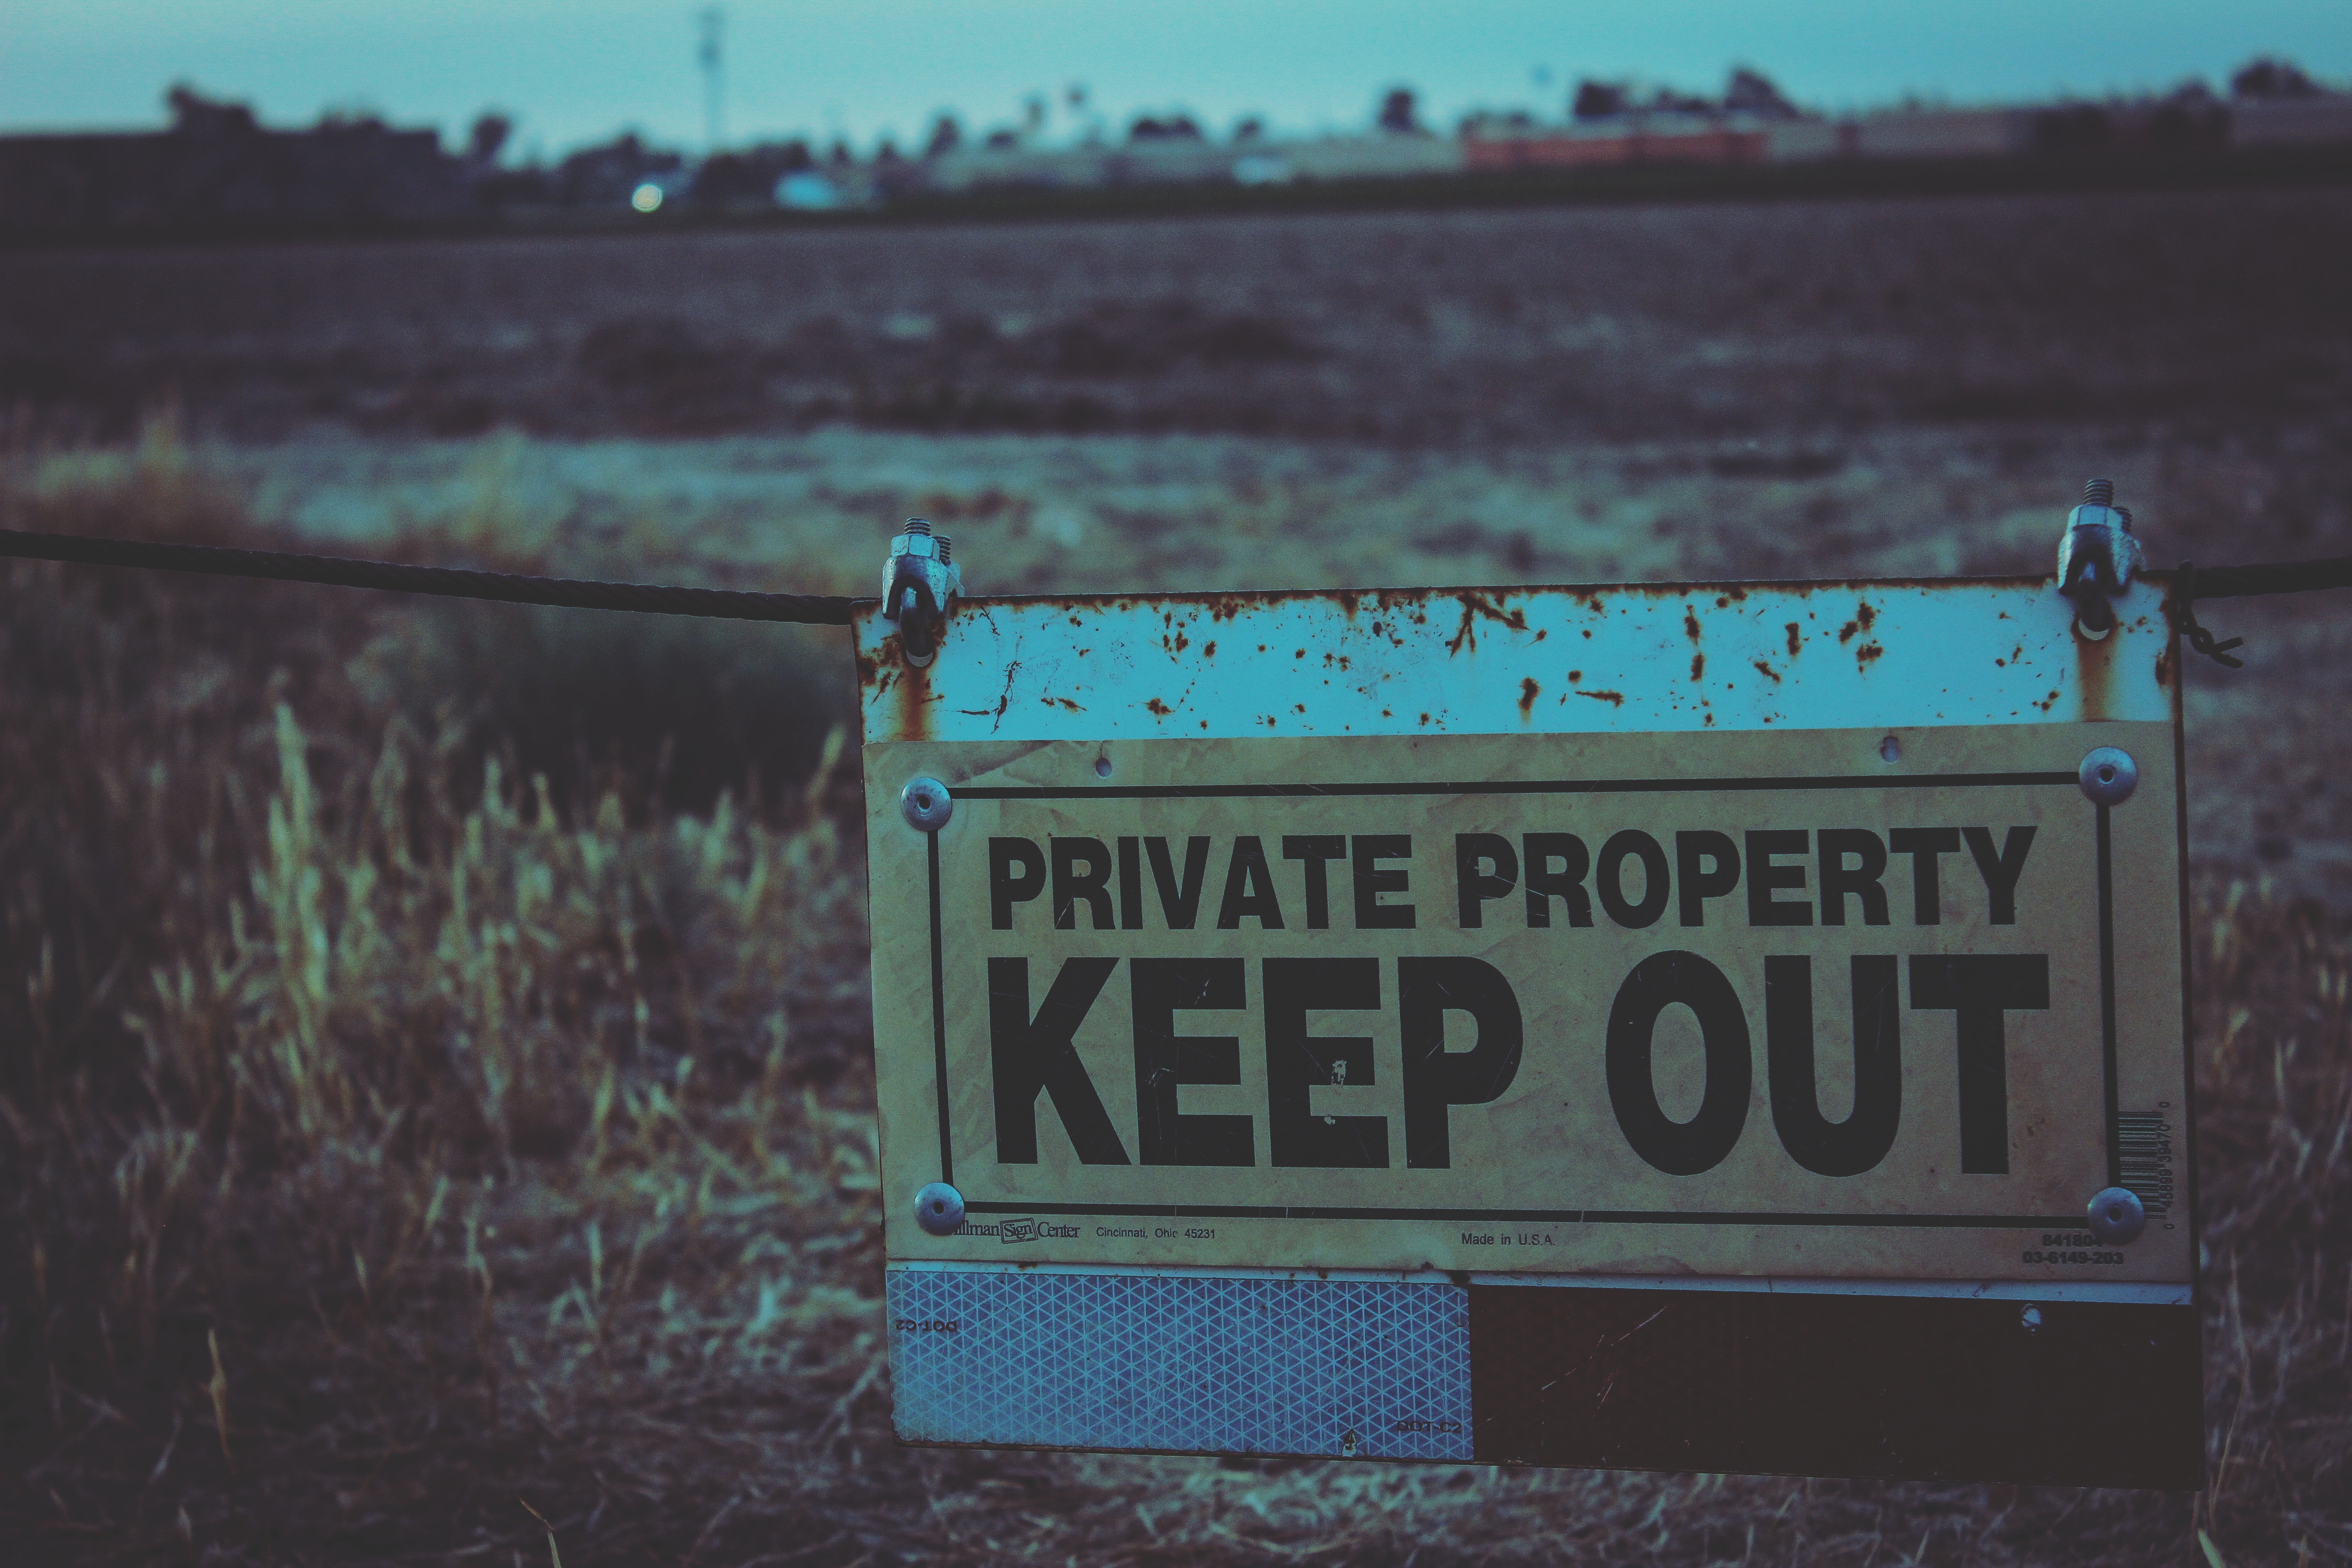 Private property keep out signboard photo